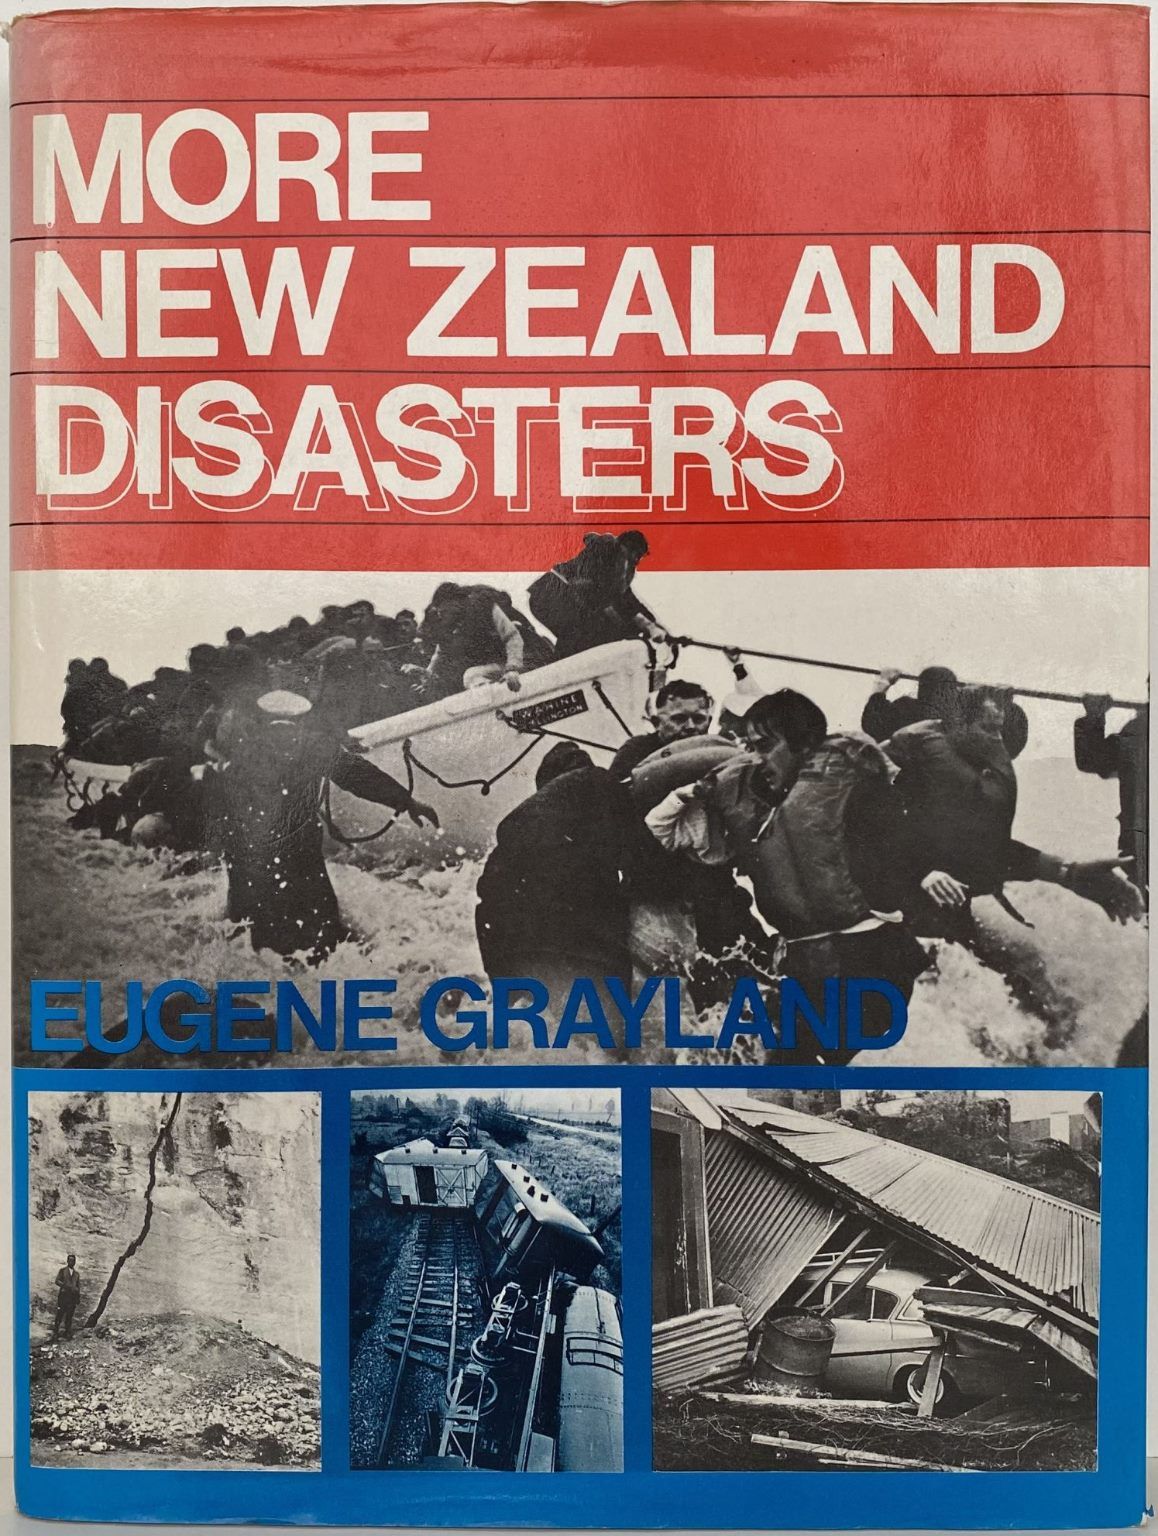 MORE NEW ZEALAND DISASTERS